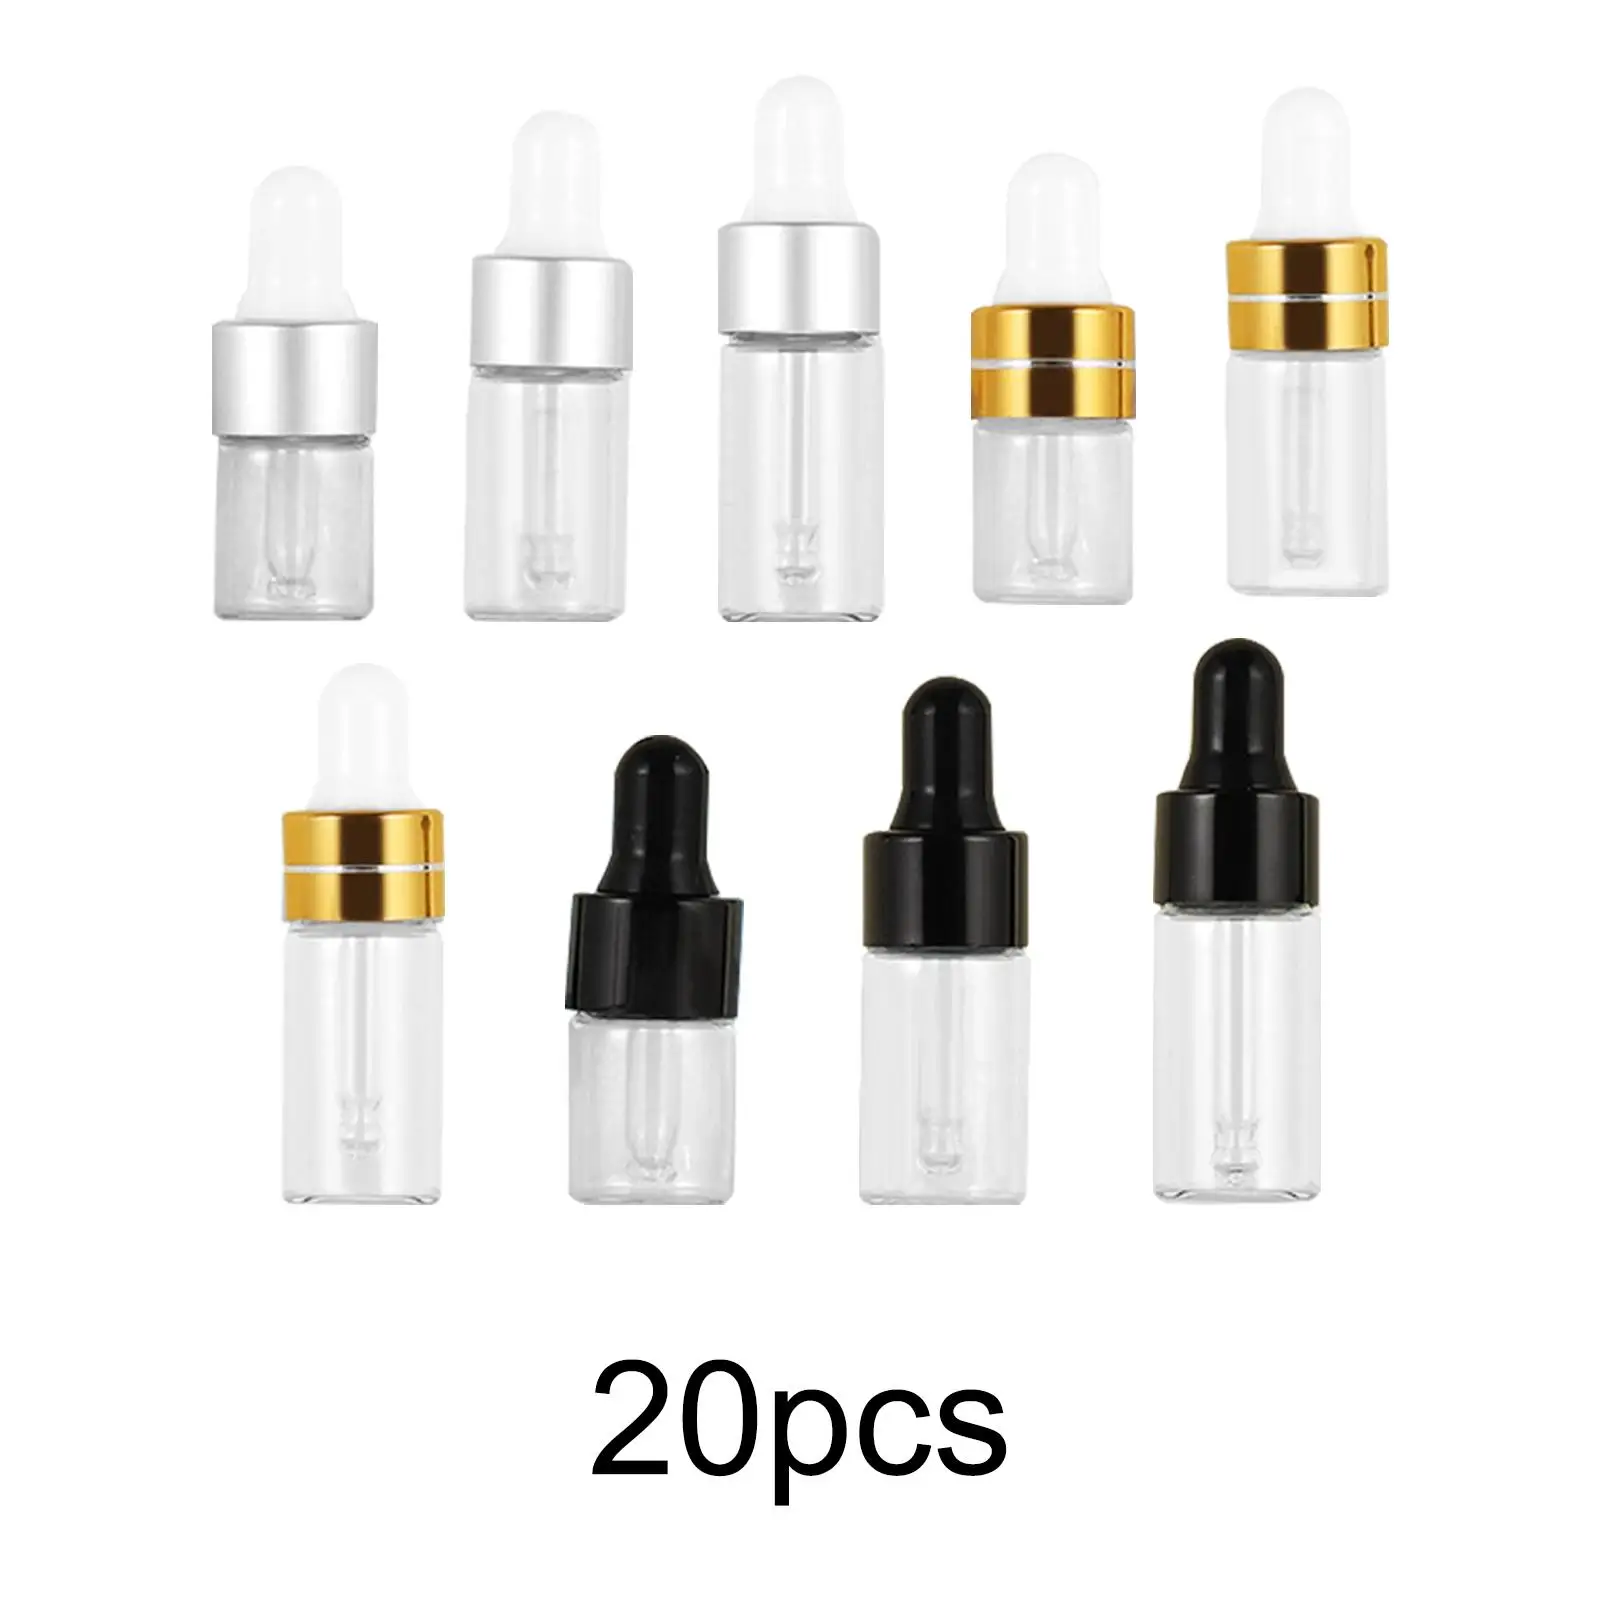 20 Pieces glass Dropper Bottles with Eye Droppers Vials Tincture Bottles for Liquids Essential Oil Body Oils Perfume Oils